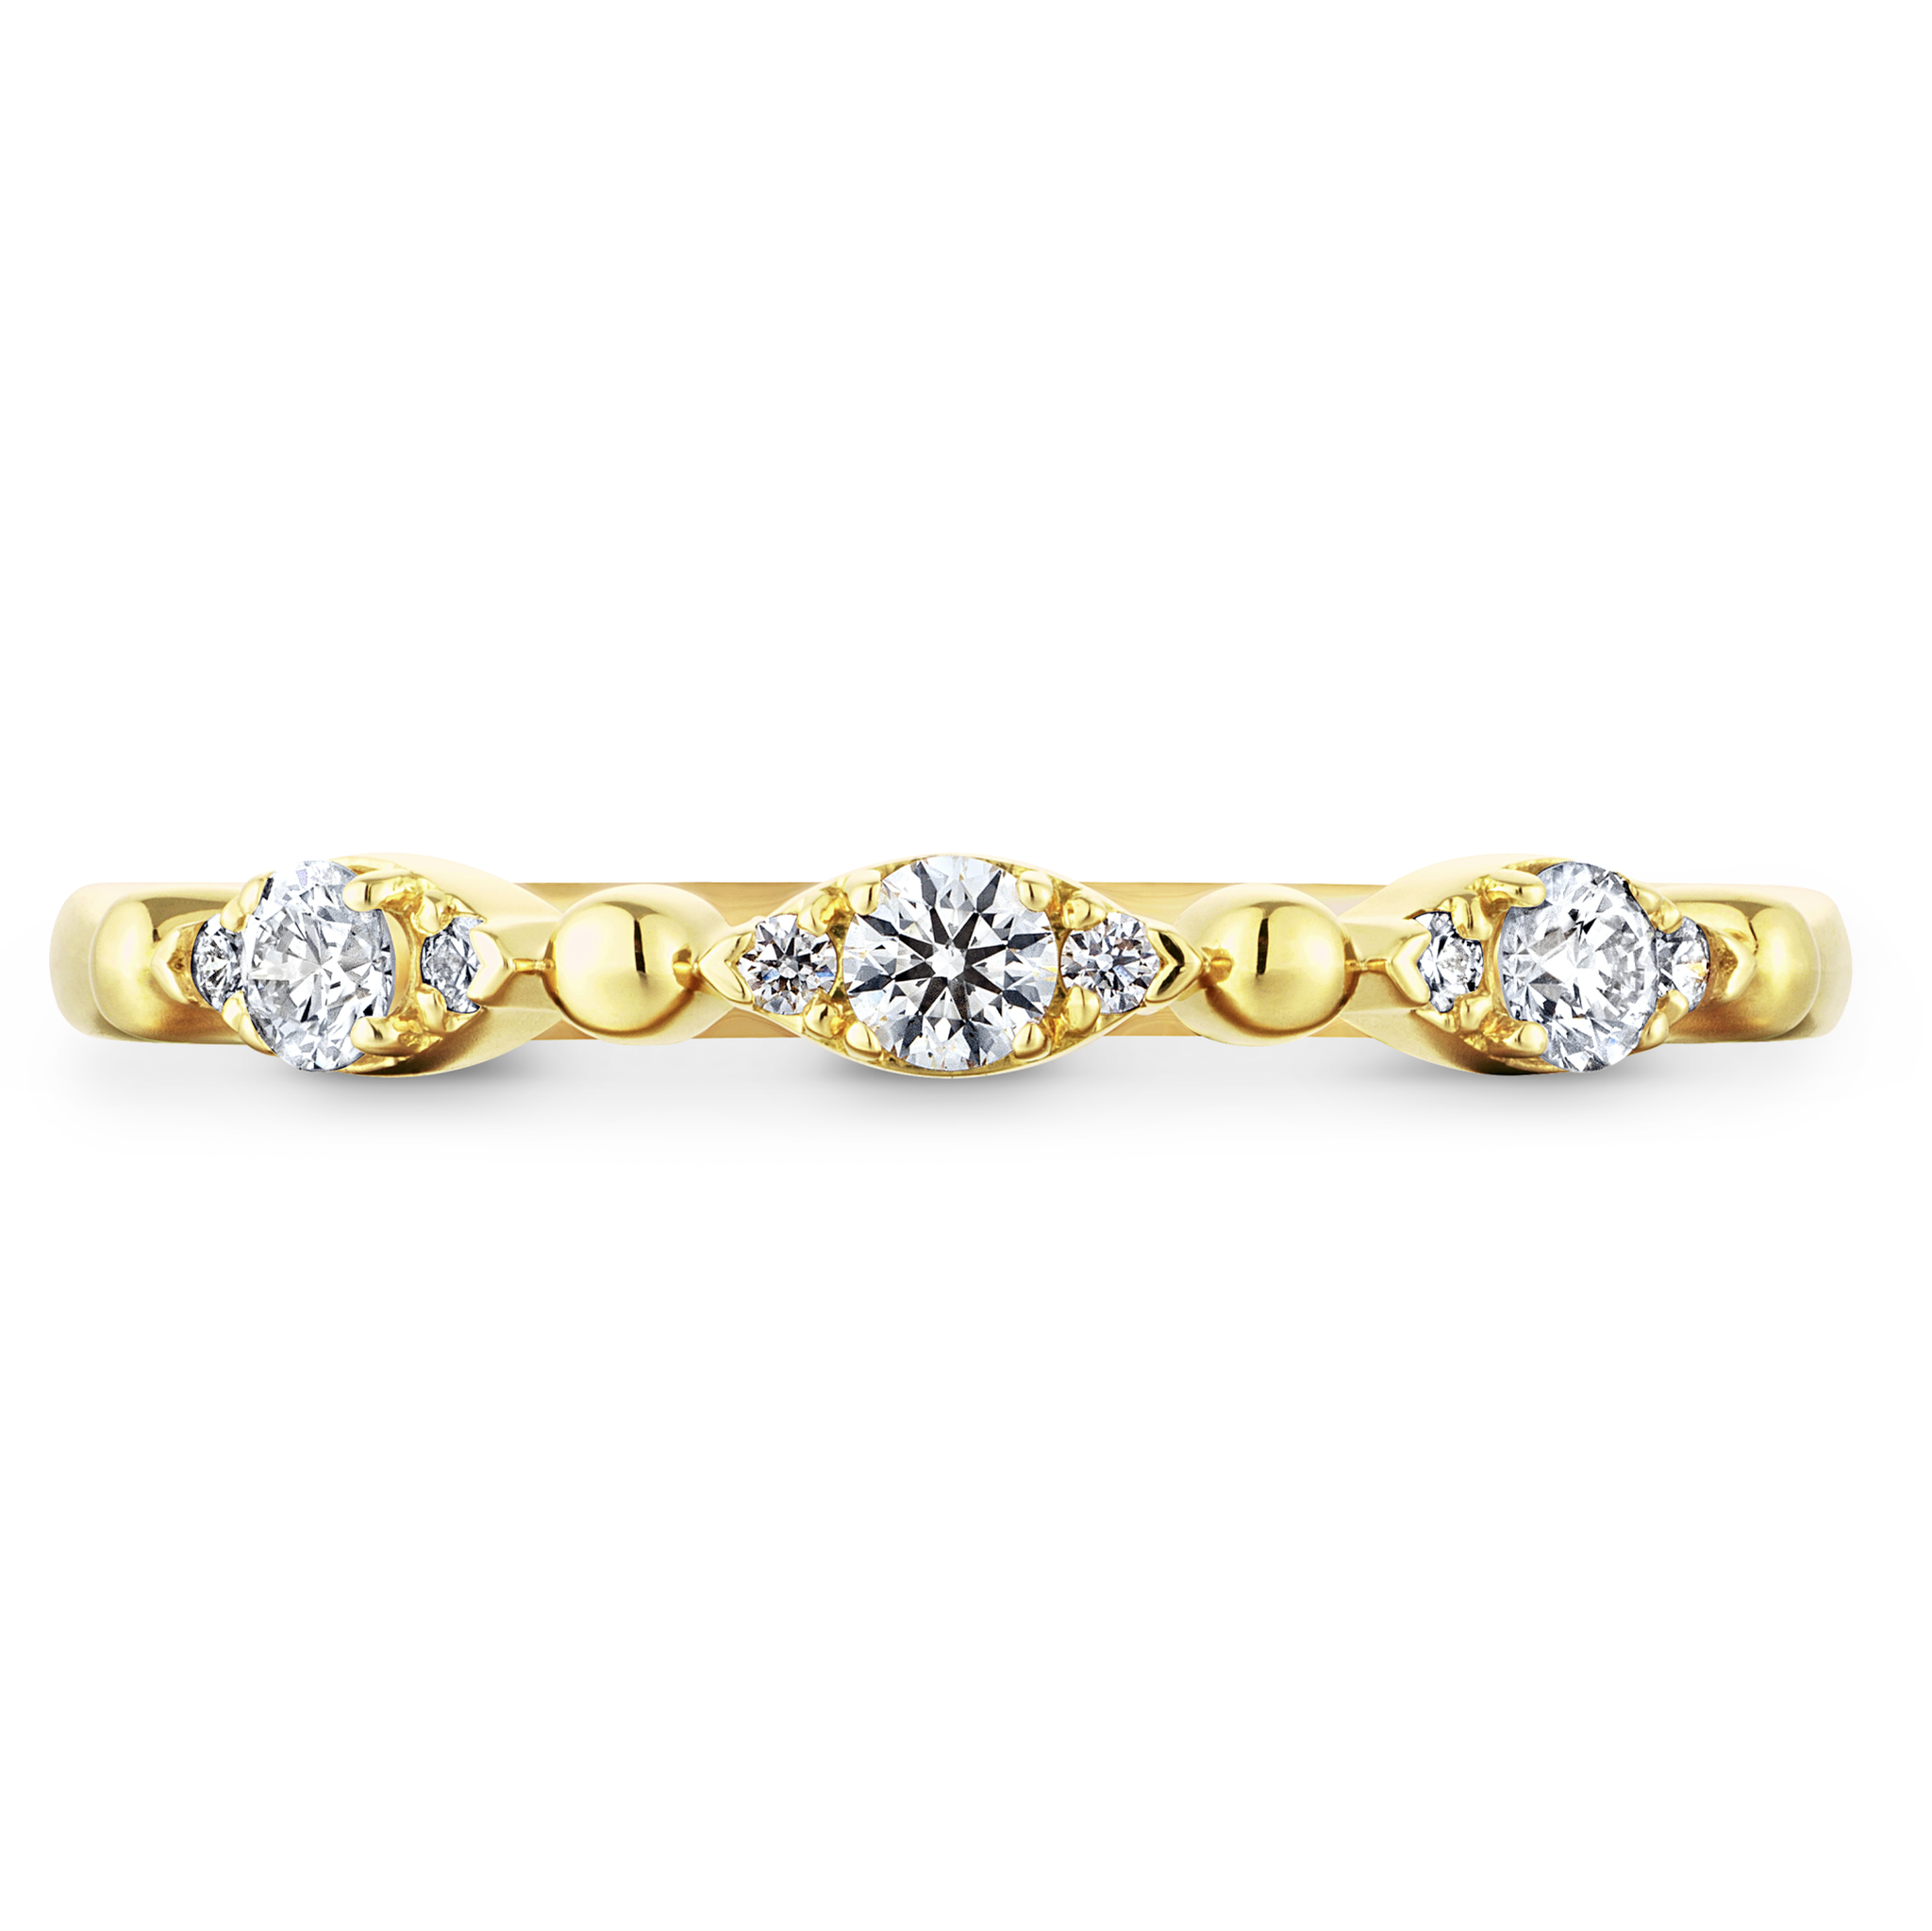 https://www.arthursjewelers.com/content/images/thumbs/Original/Beaded Regal Band_yellow-179452580.png